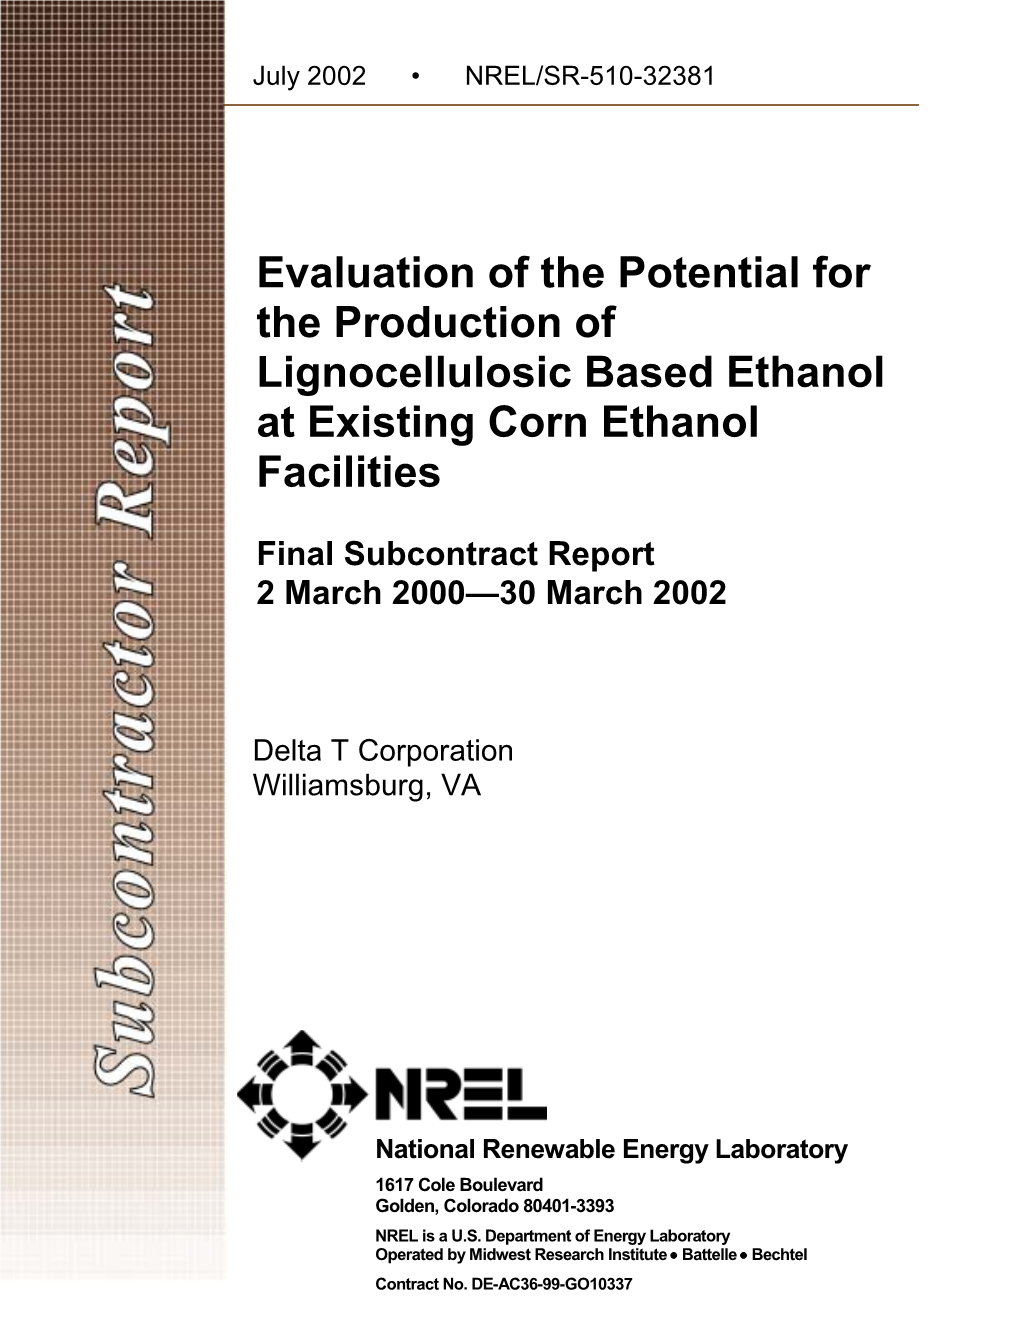 Final Subcontract Report 2 March 2000—30 March 2002